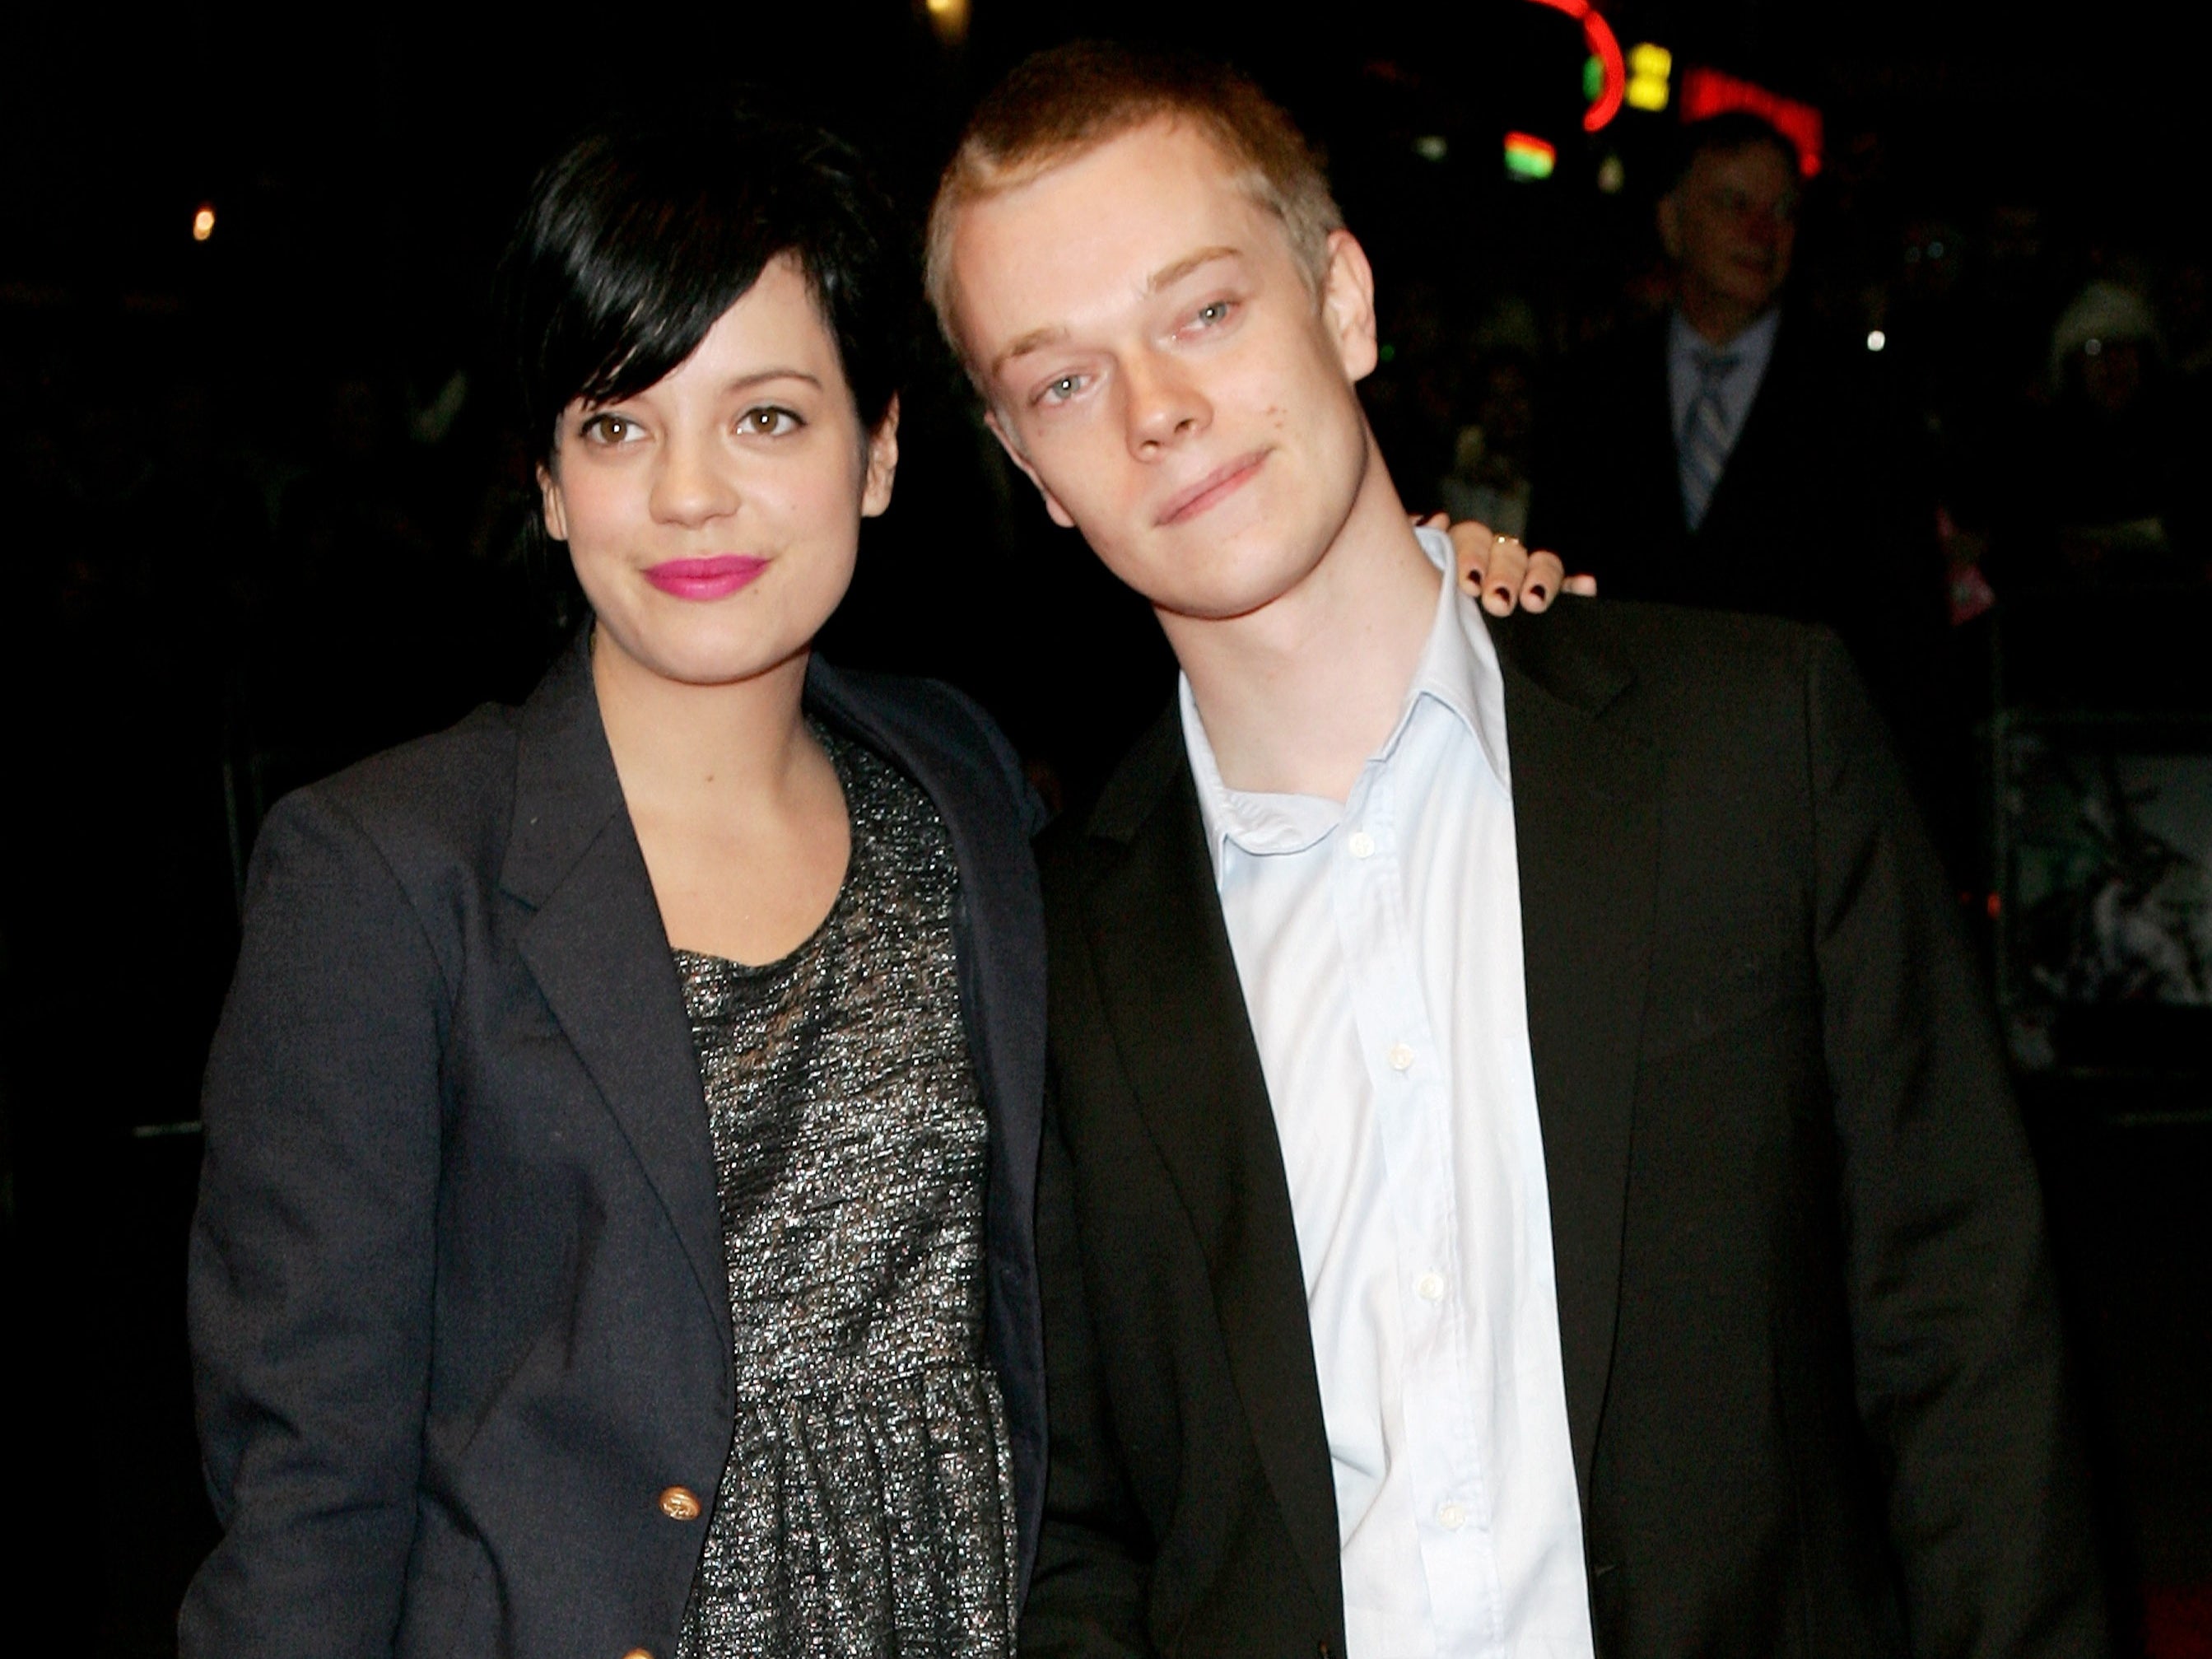 Musician Lily Allen and her brother Alfie Allen arrive at The Times BFI 51st London Film Festival screening of ‘Bricklane’ in 2007 in London